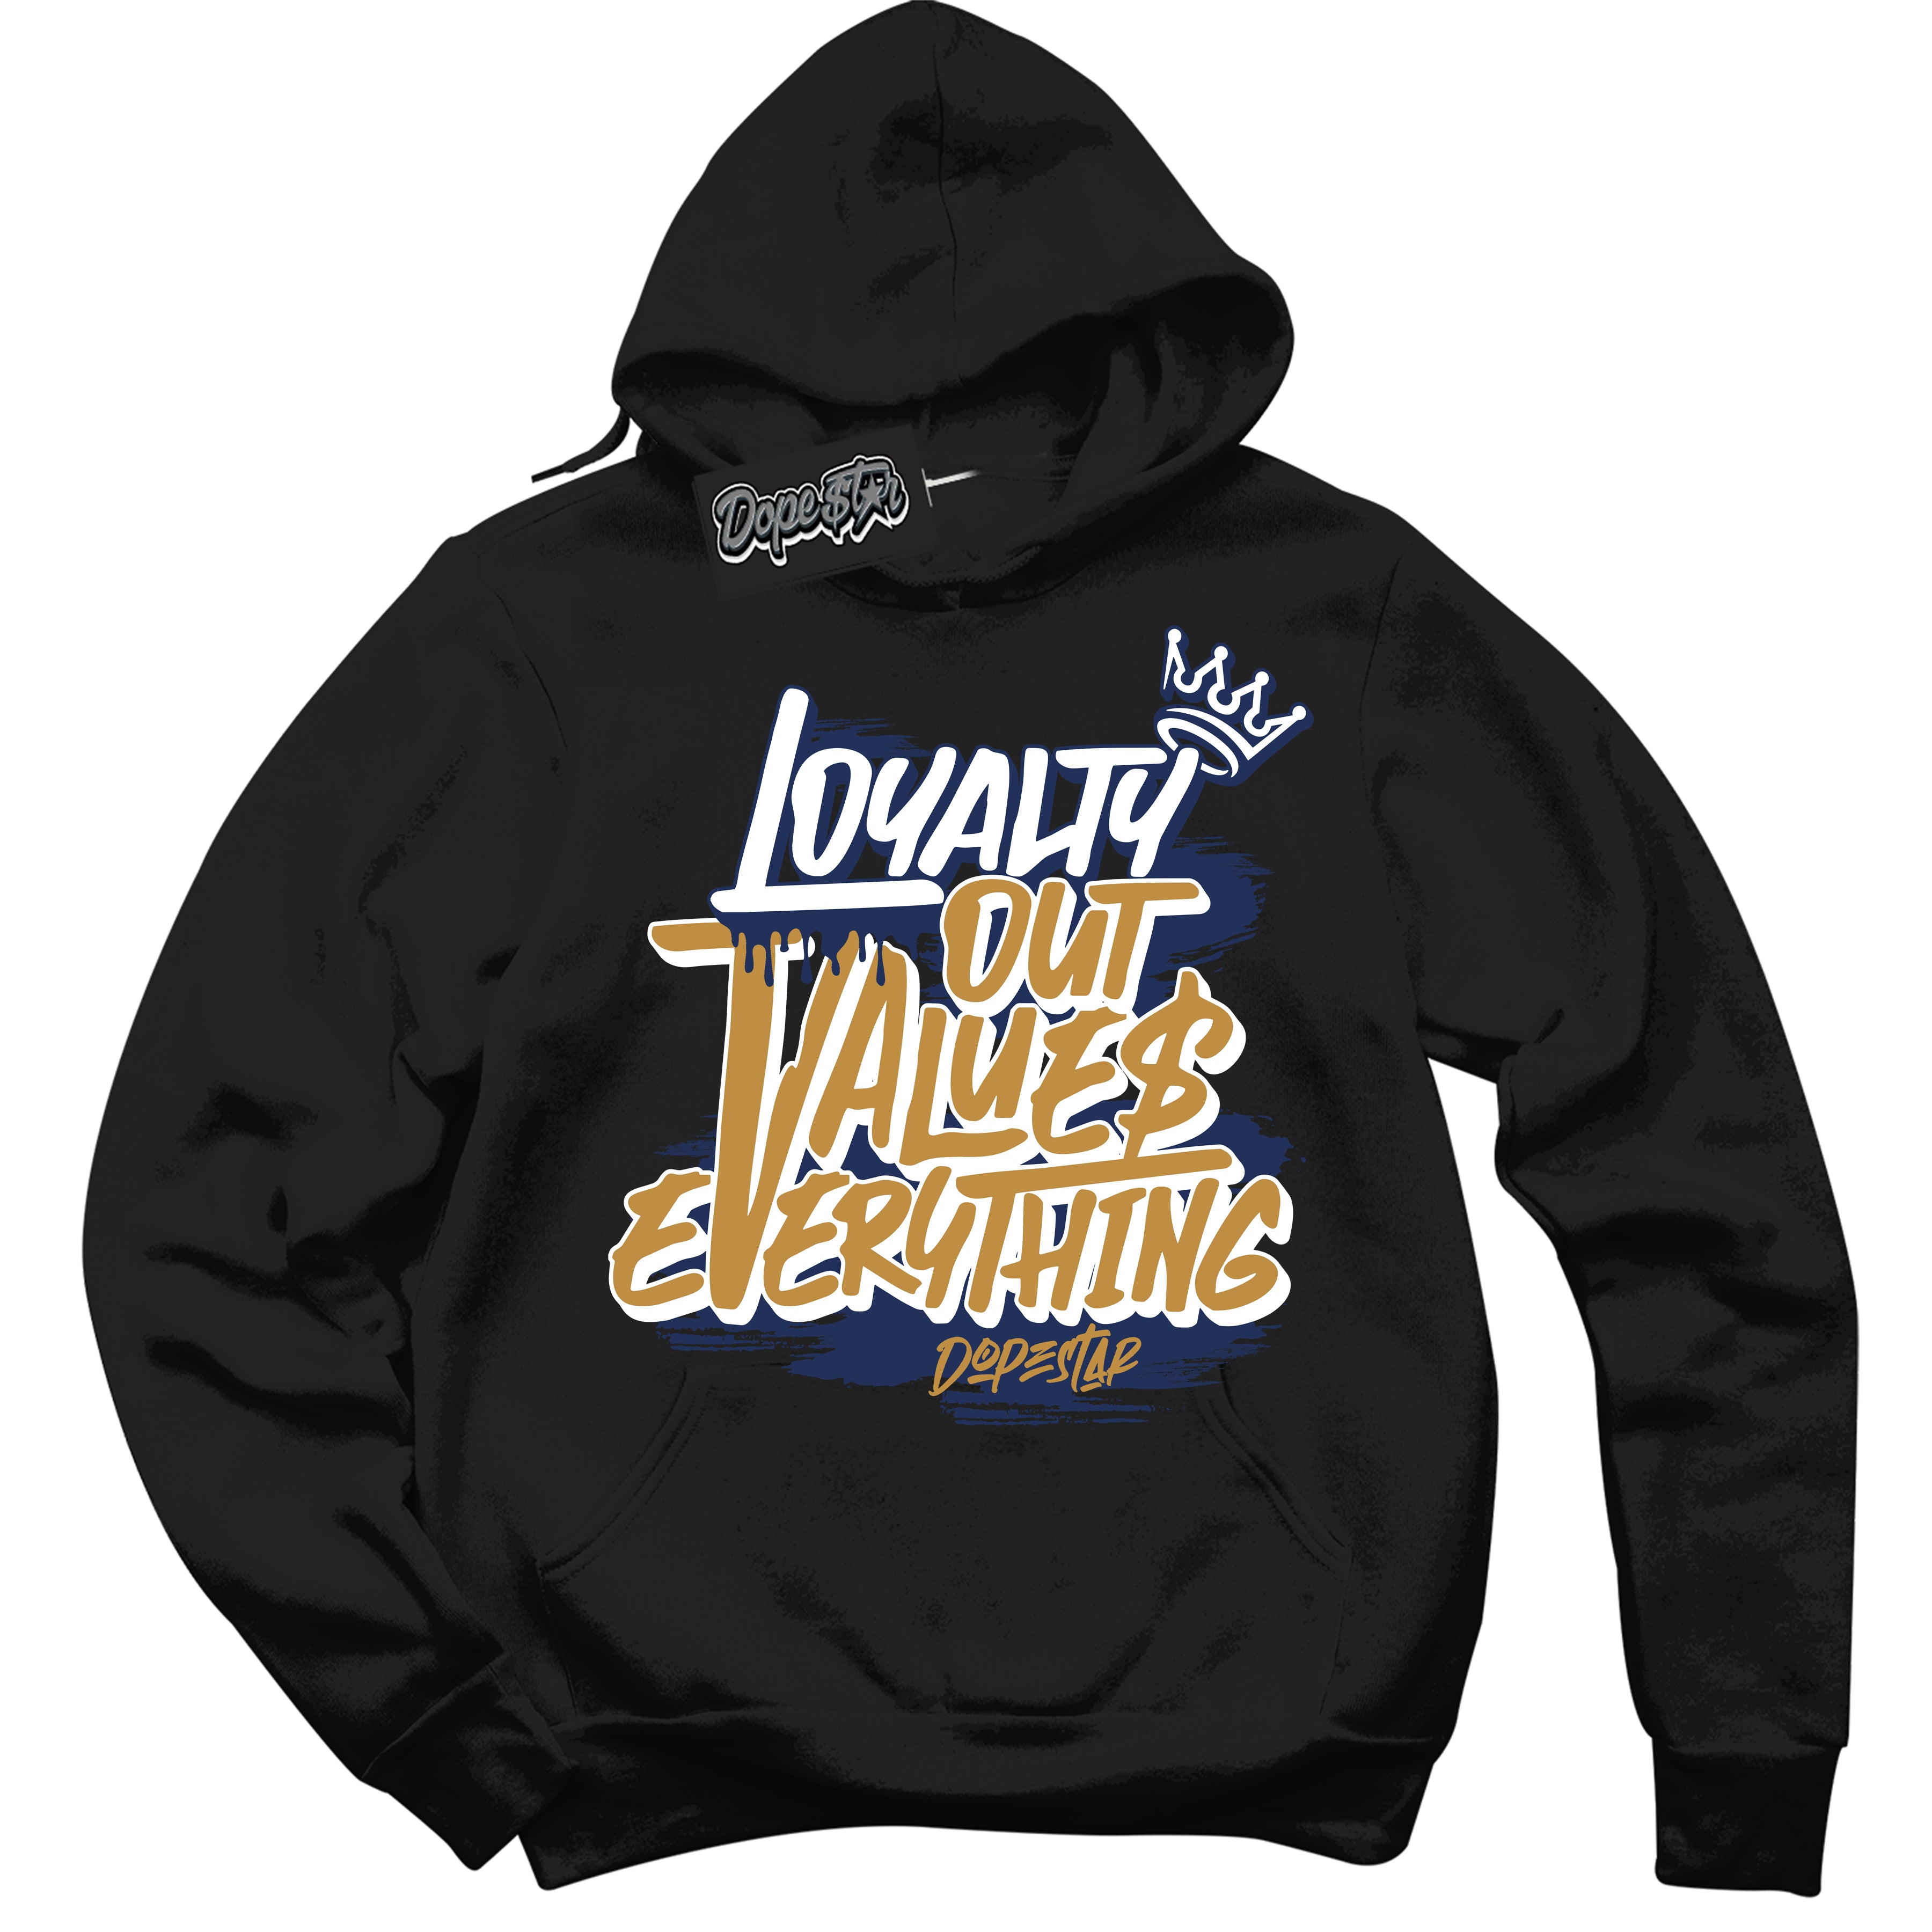 Cool Black Hoodie with “ Loyalty Out Values Everything ”  design that Perfectly Matches  Orange Label Navy Gum Sneakers.